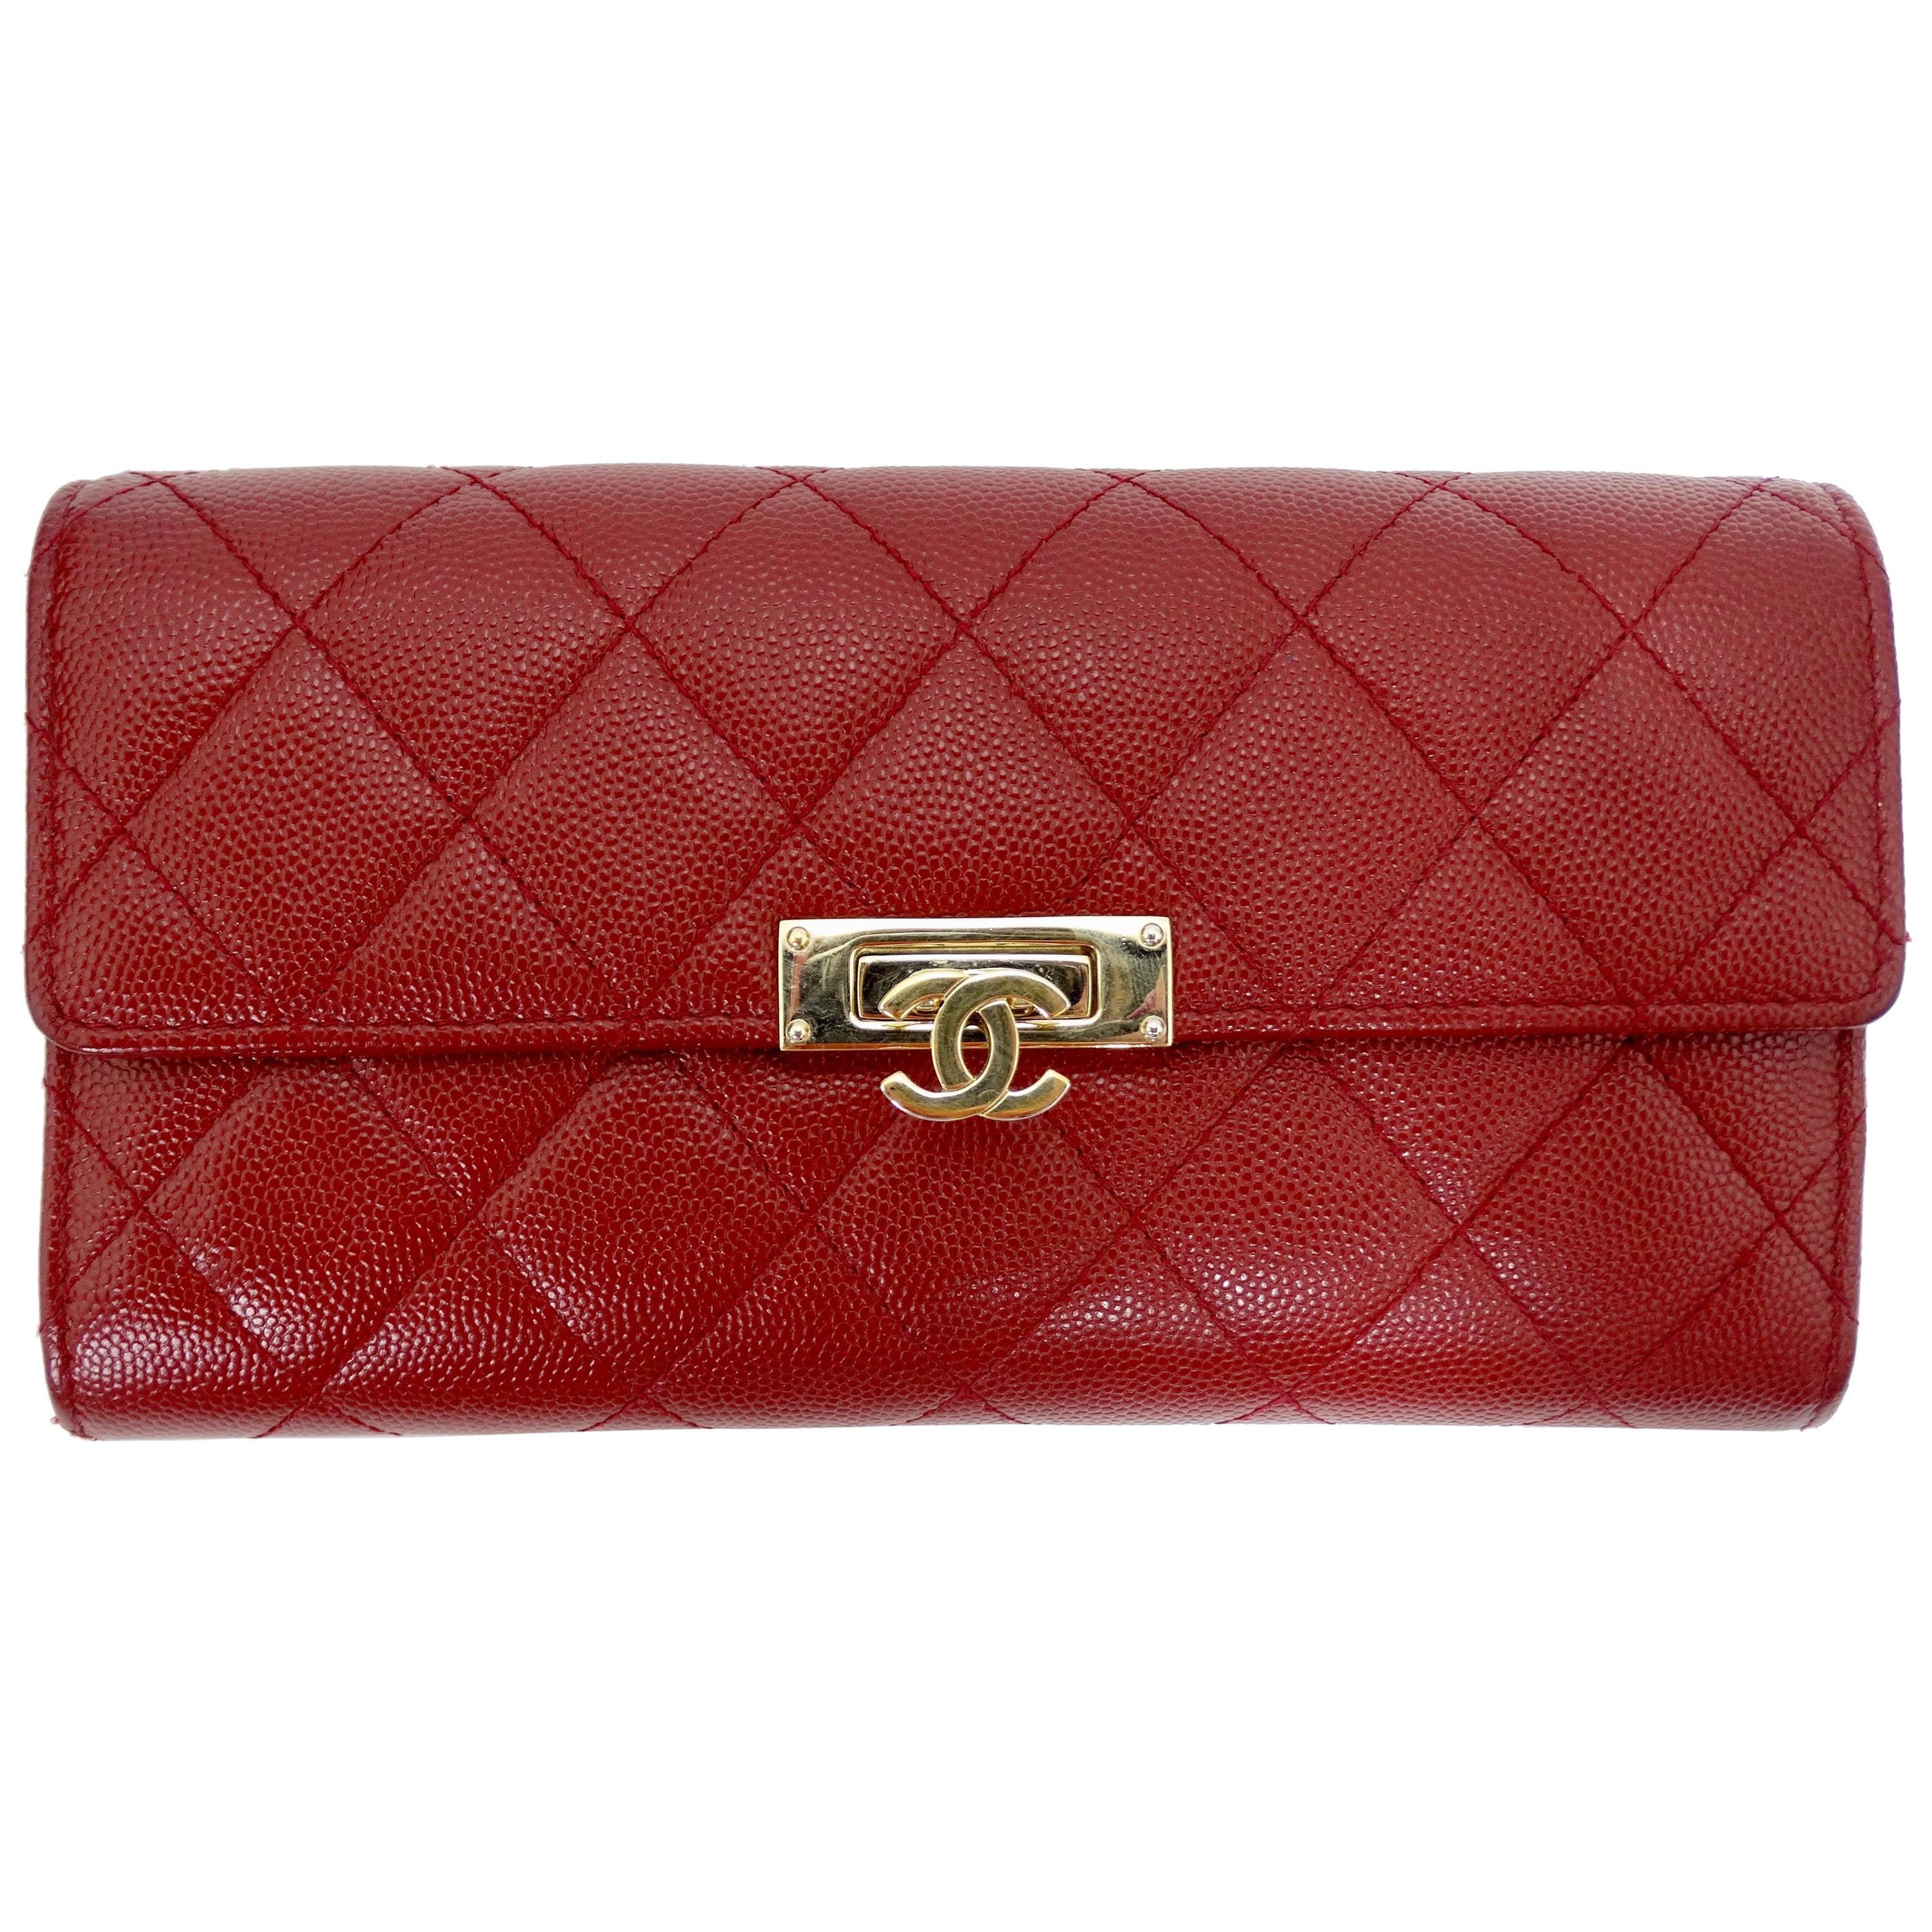 Chanel 2018 Lipstick Red Gussest Flap Wallet 